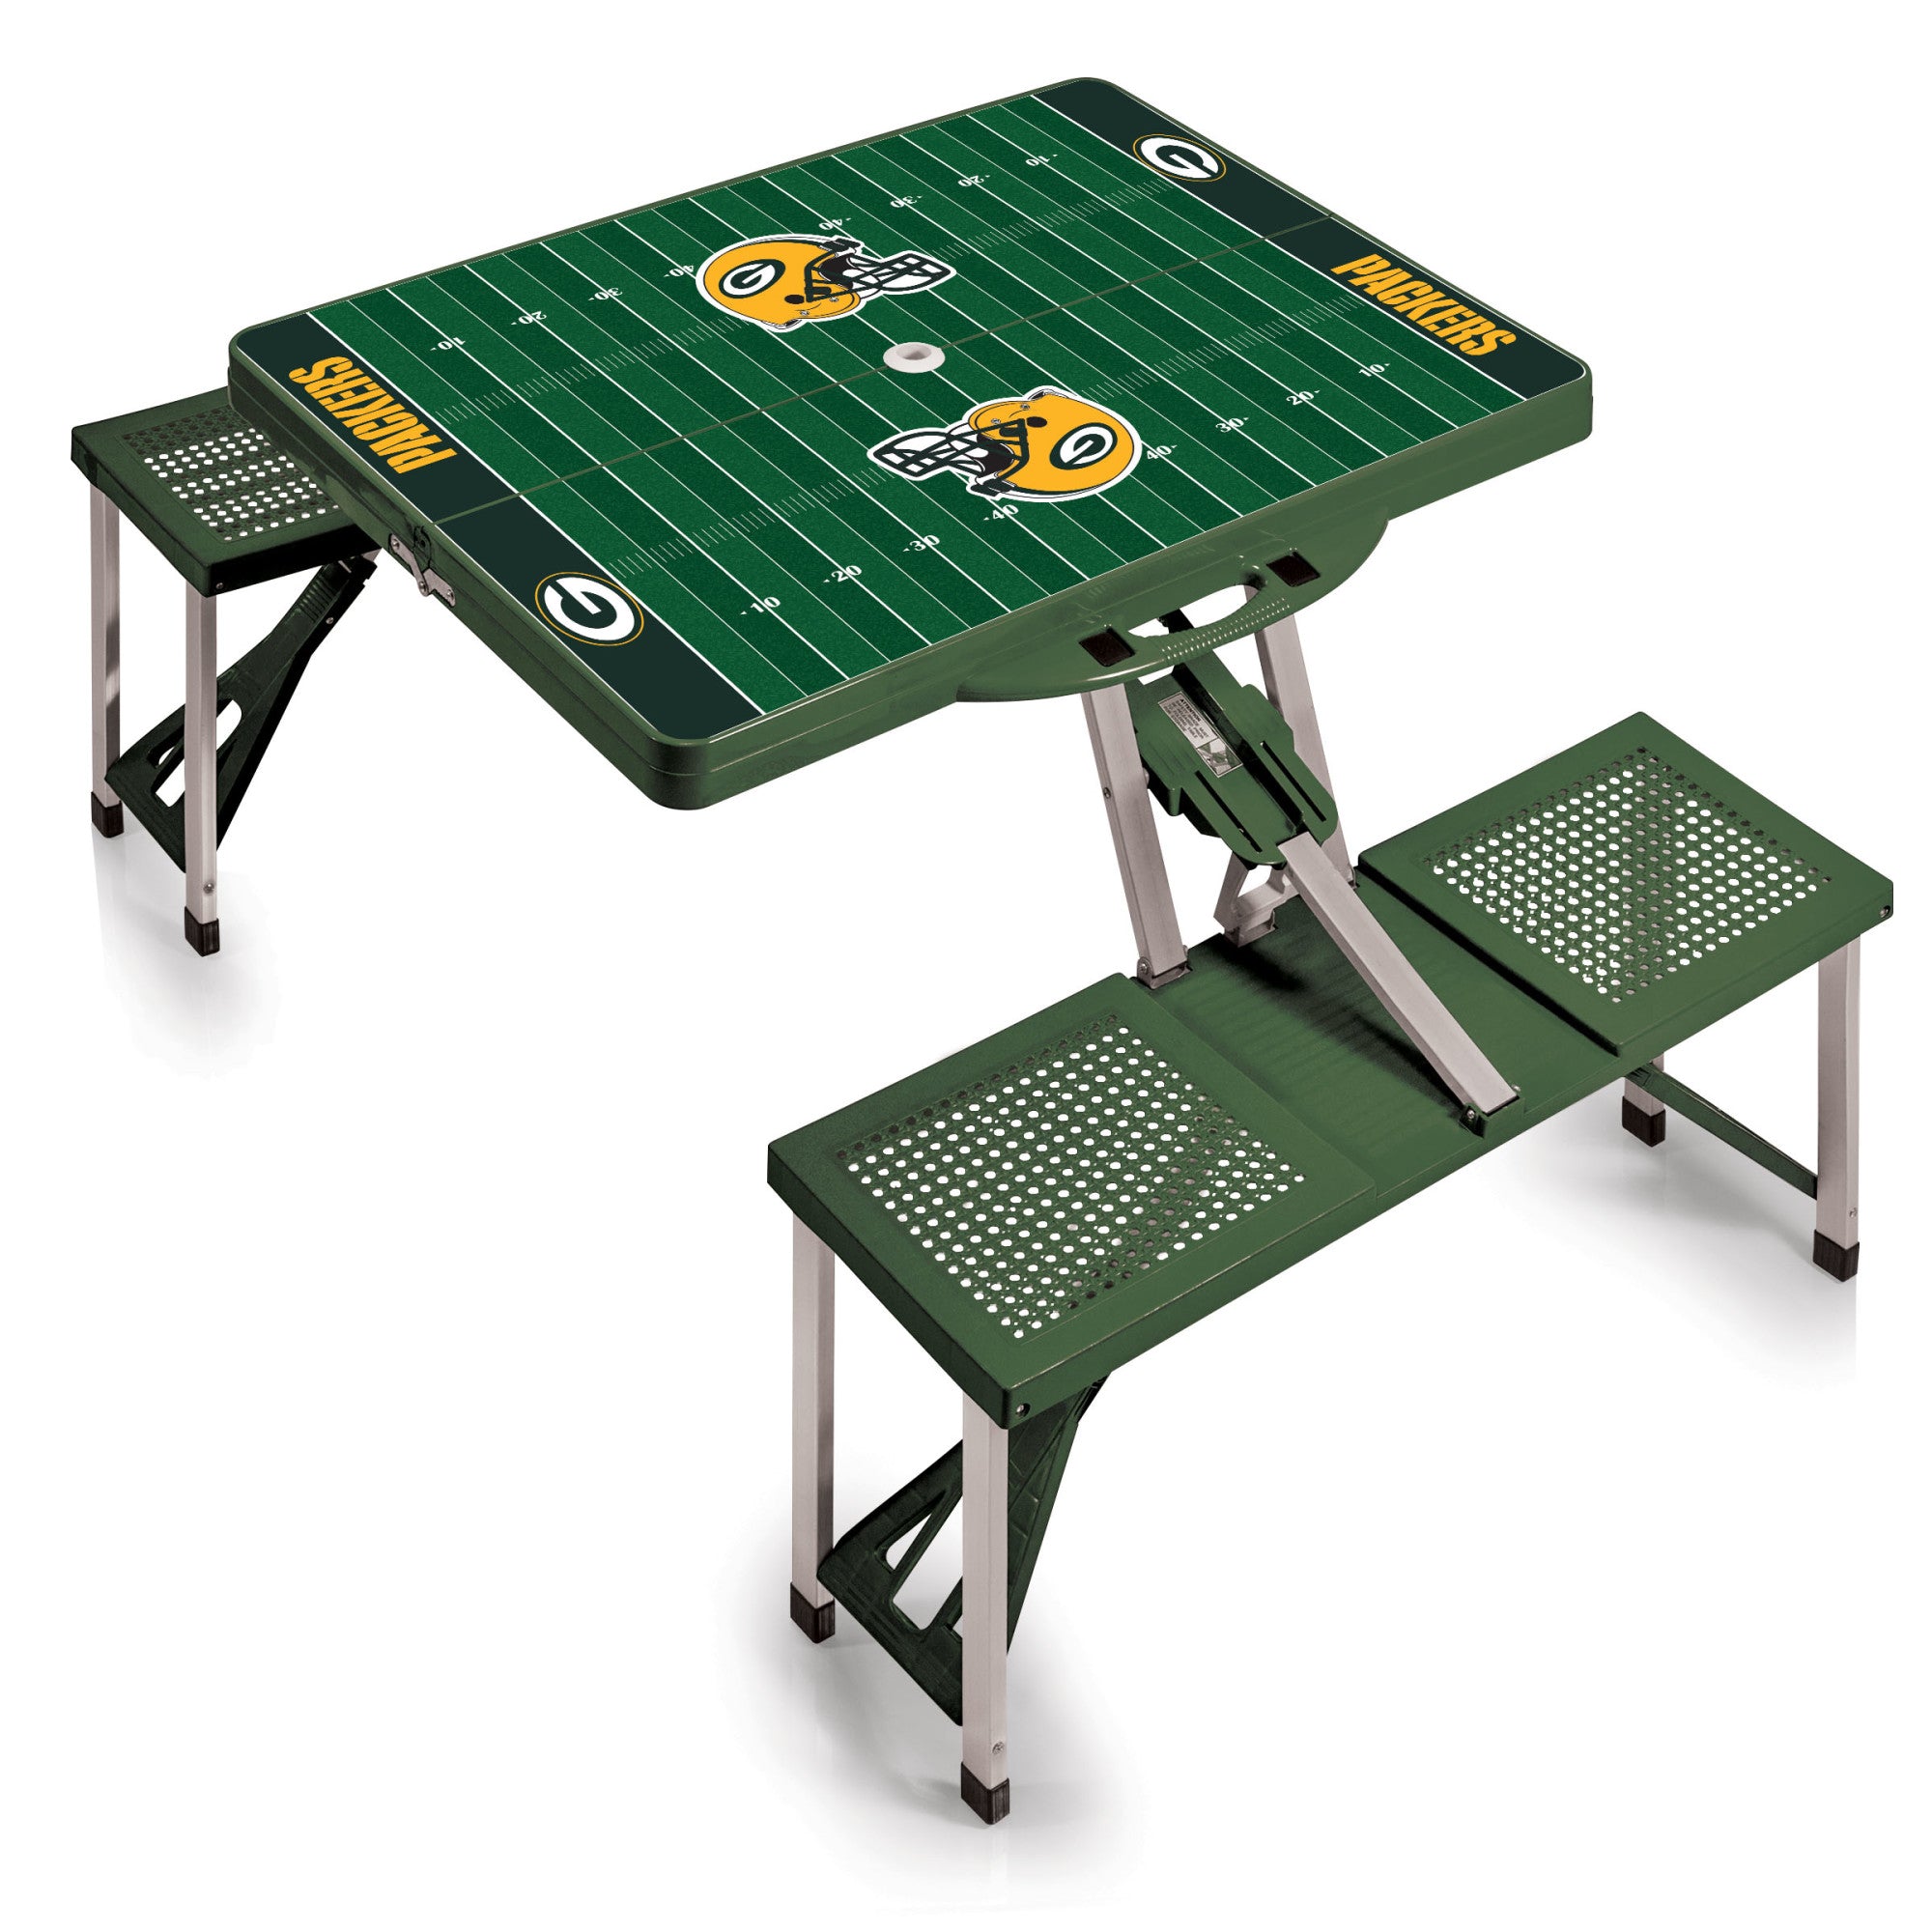 Green Bay Packers Football Field - Picnic Table Portable Folding Table with Seats